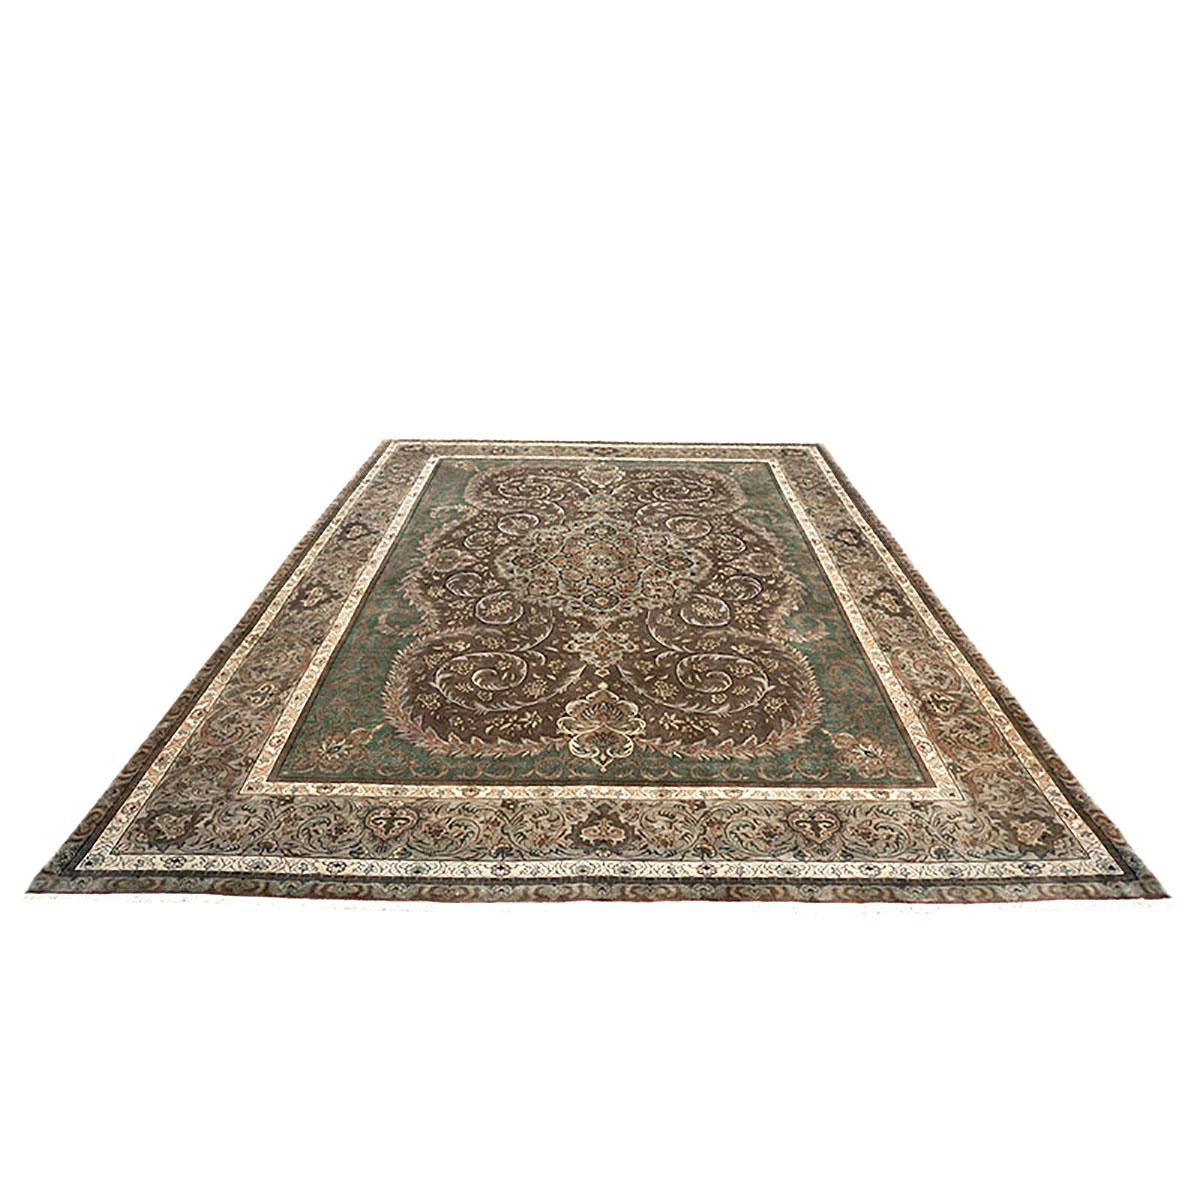 Mid-20th Century Antique Persian Tabriz 9x12 Green, Brown, & Taupe Handmade Area Rug For Sale